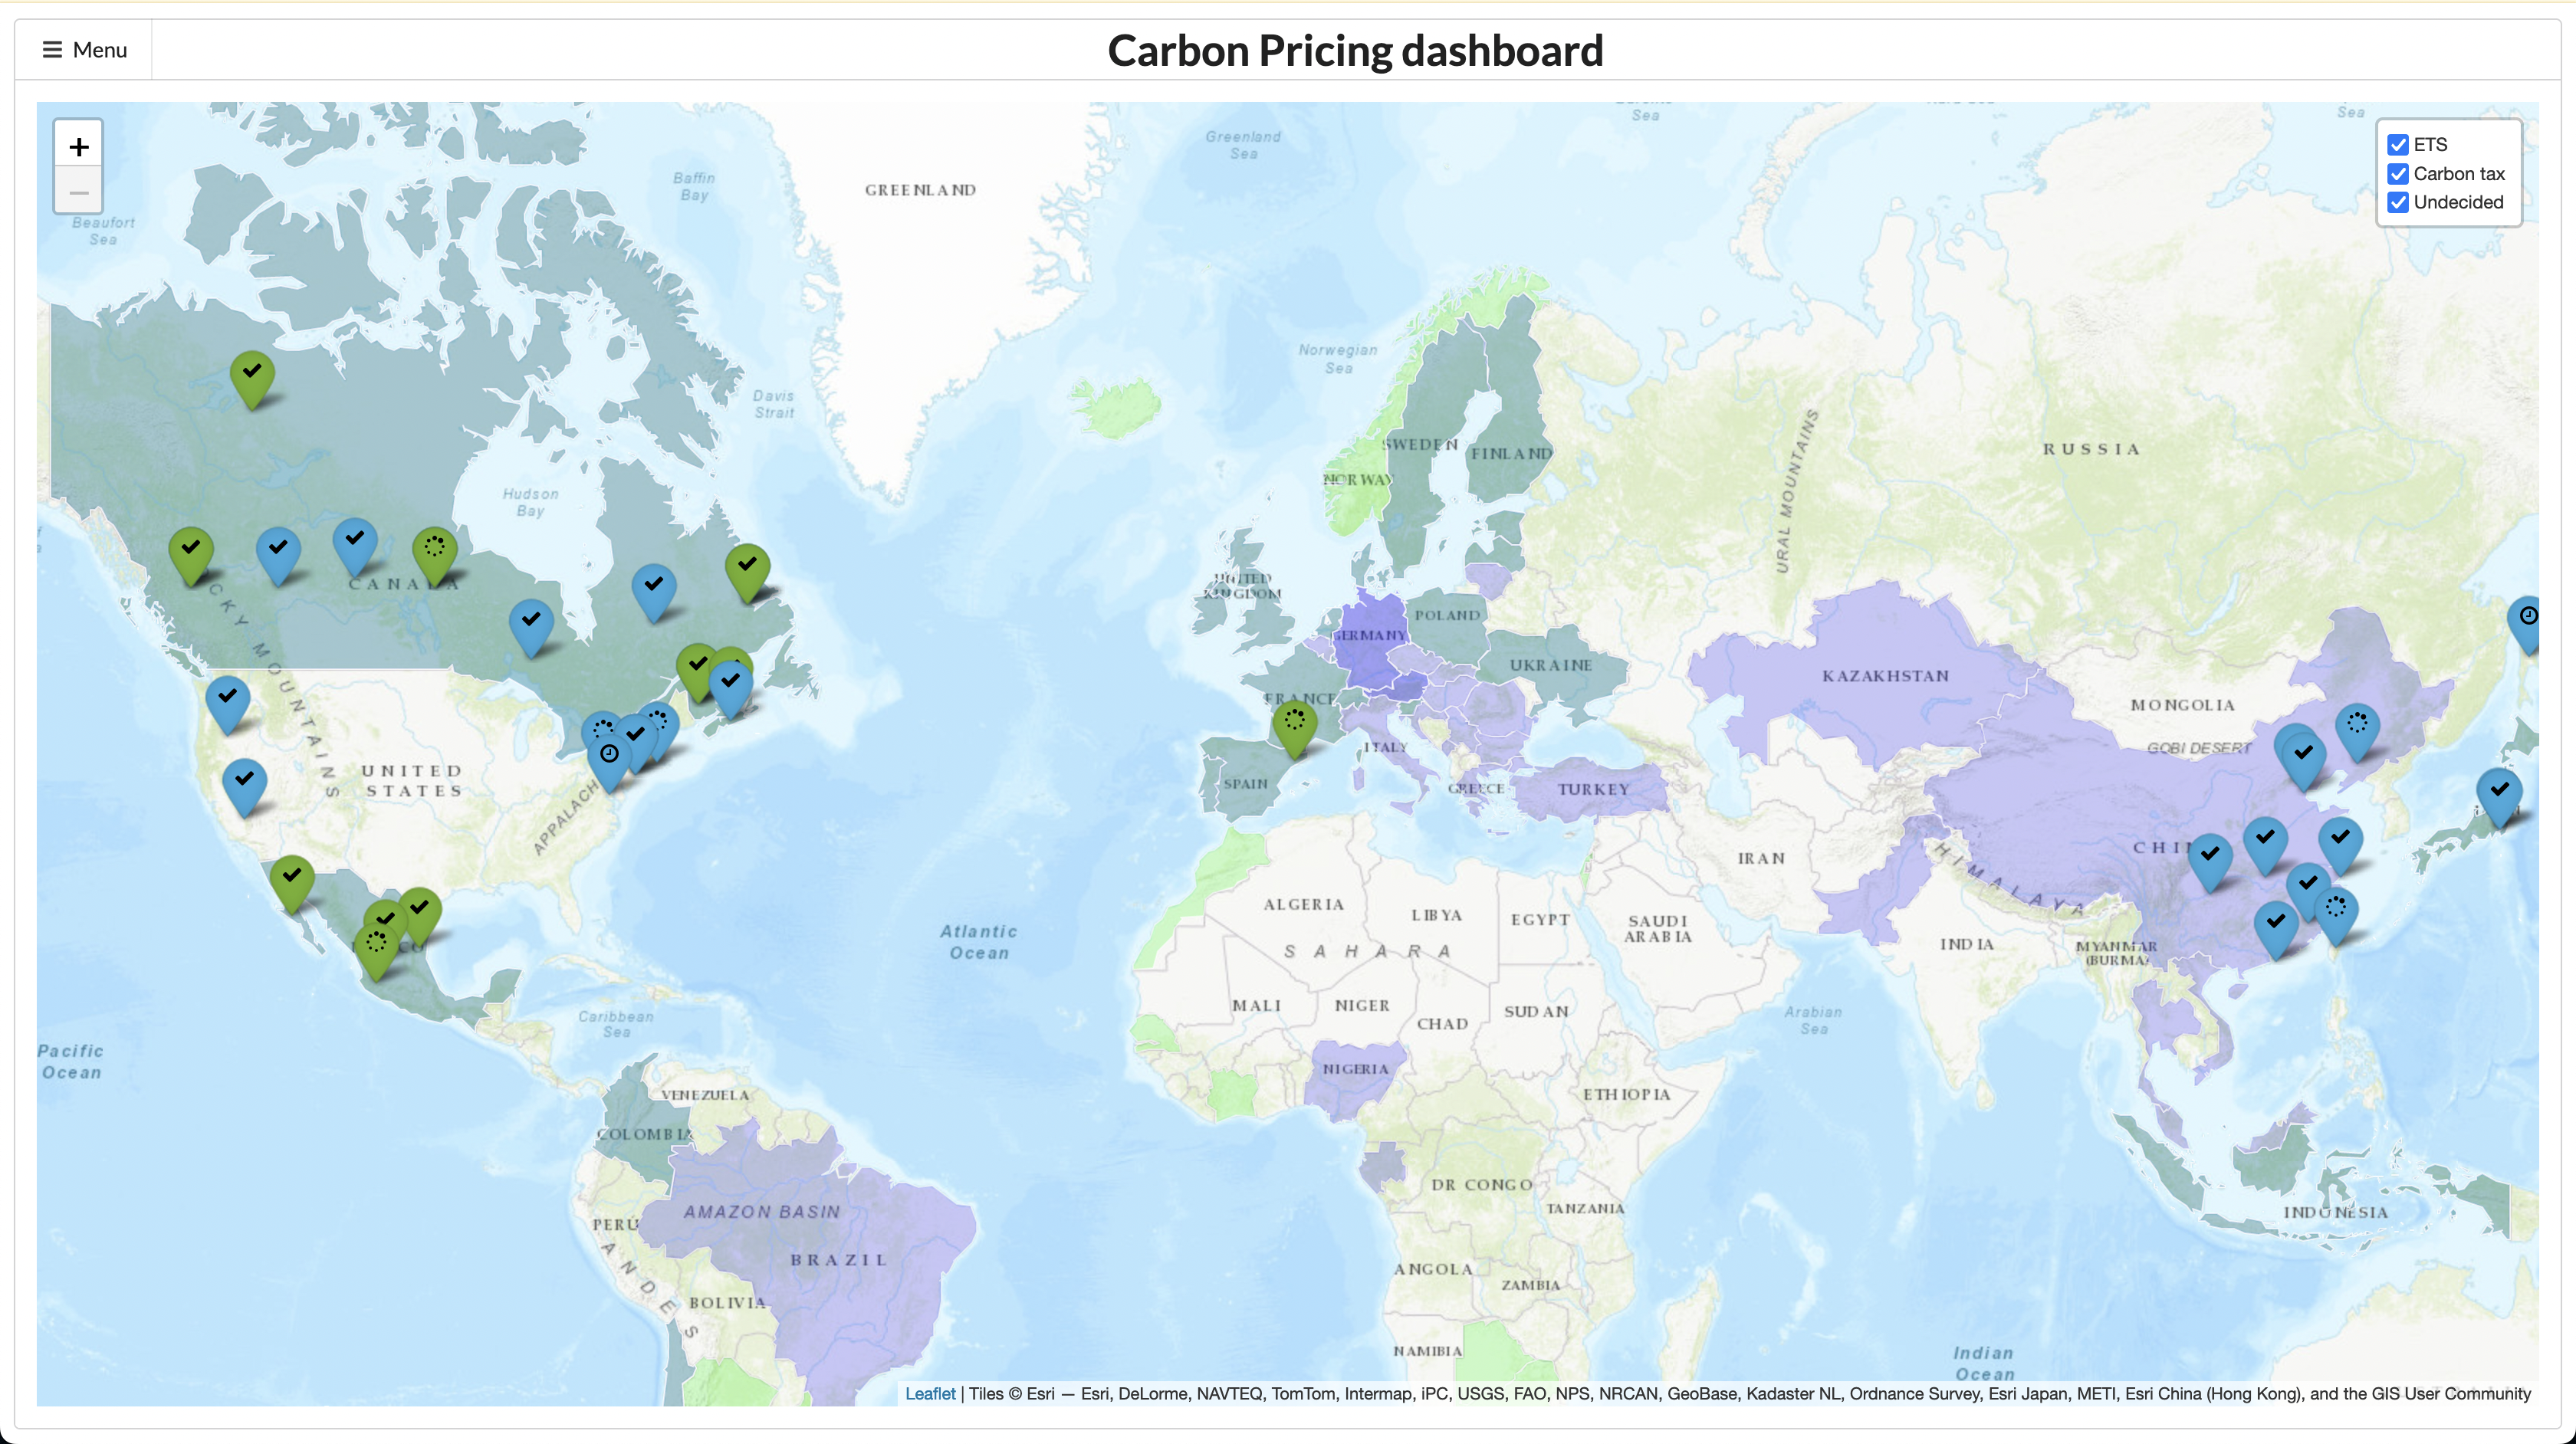 World Bank Carbon Pricing Dashboard Redesign with R Shiny and Rhino package